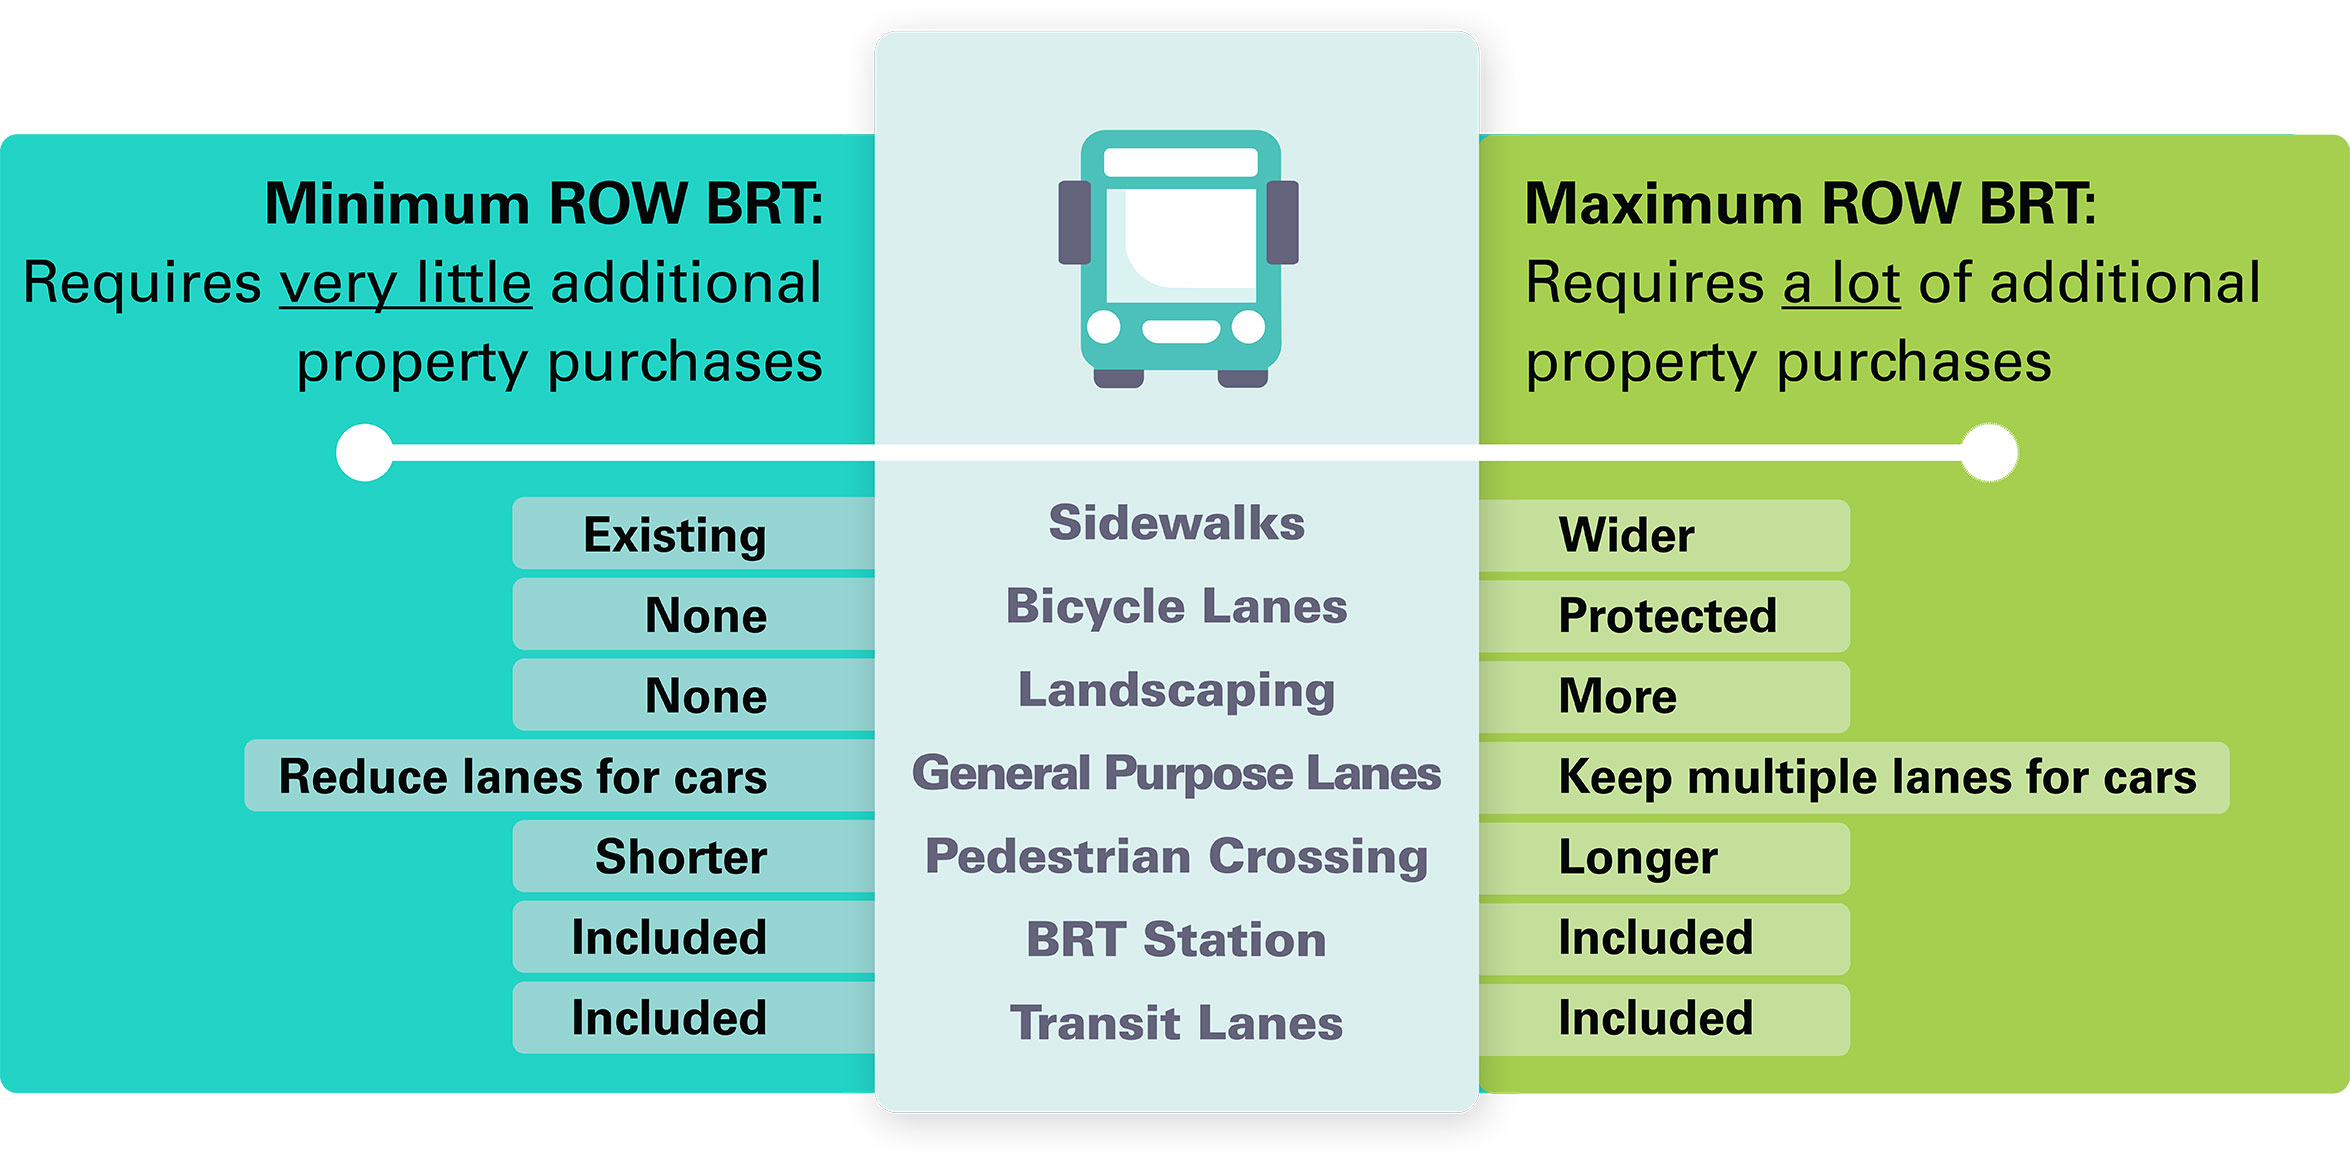 Minimum right-of-way bus rapid transit requires little additional property purposes; Maximum right-of-way bus rapid transit requires a lot of additional purchases.